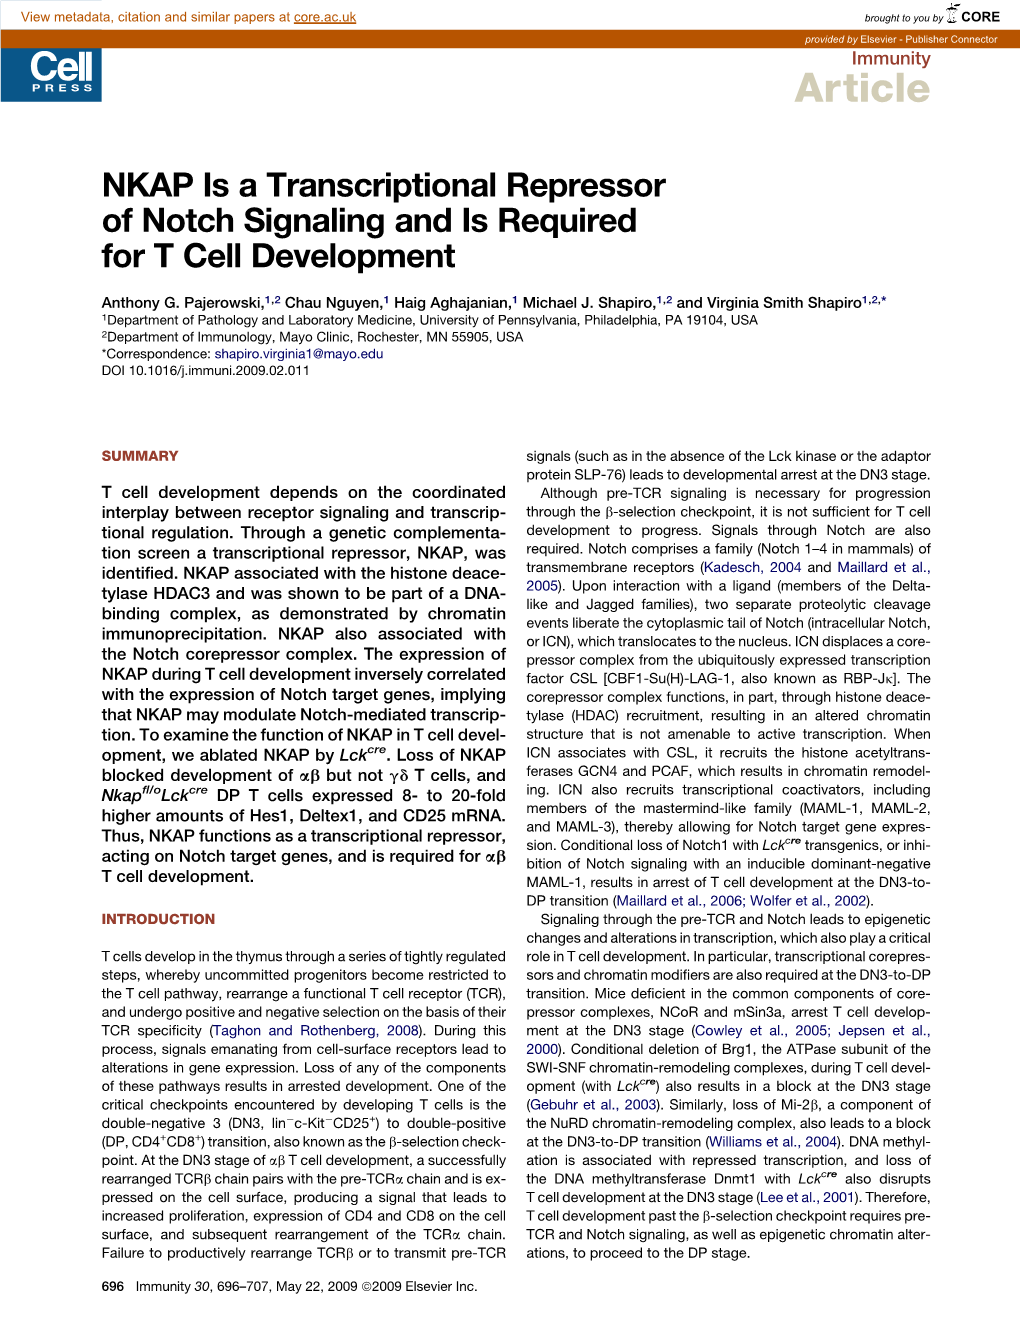 NKAP Is a Transcriptional Repressor of Notch Signaling and Is Required for T Cell Development